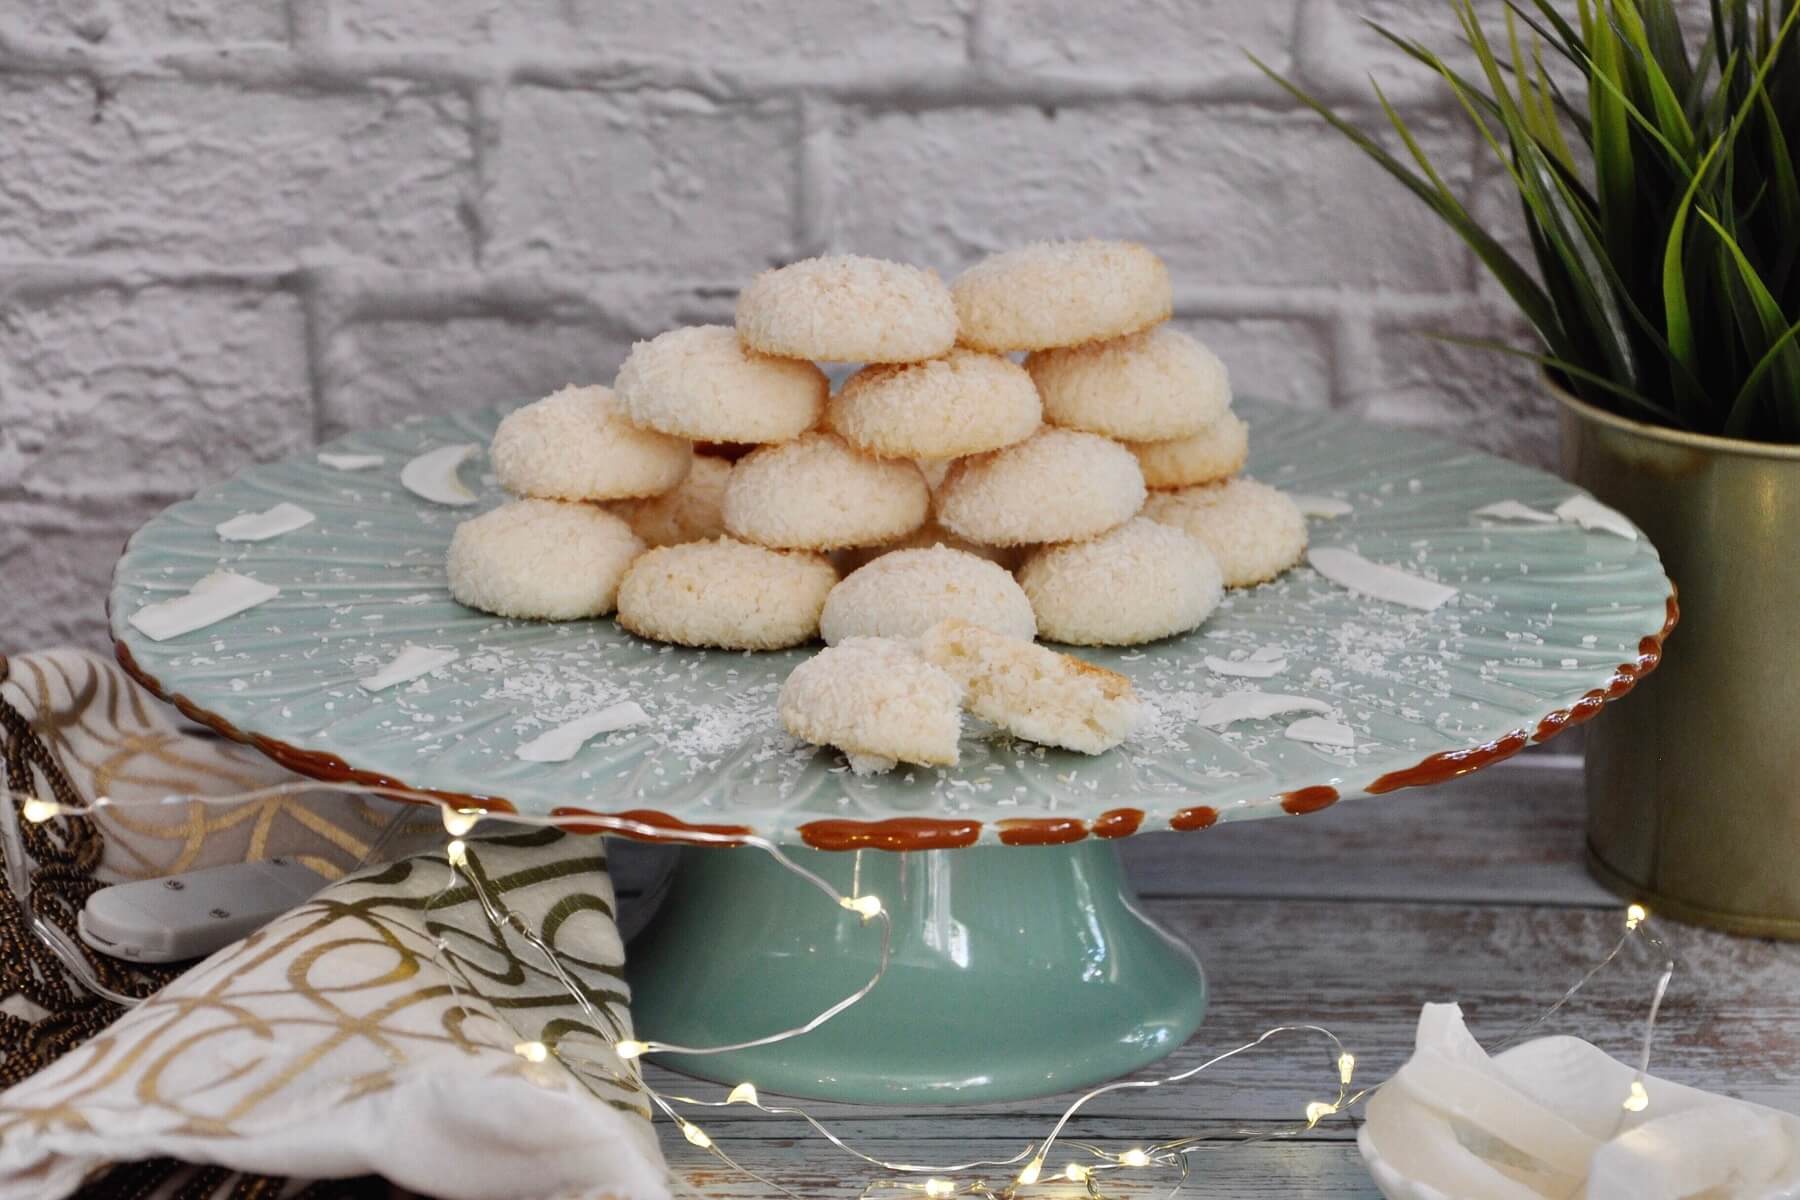 Baked to golden brown perfection with a fluffy texture, these Toasted Coconut Cookies are the perfect holiday treat! Enjoy them as a light dessert and savor the subtle sweetness and delicious coconut flavor!